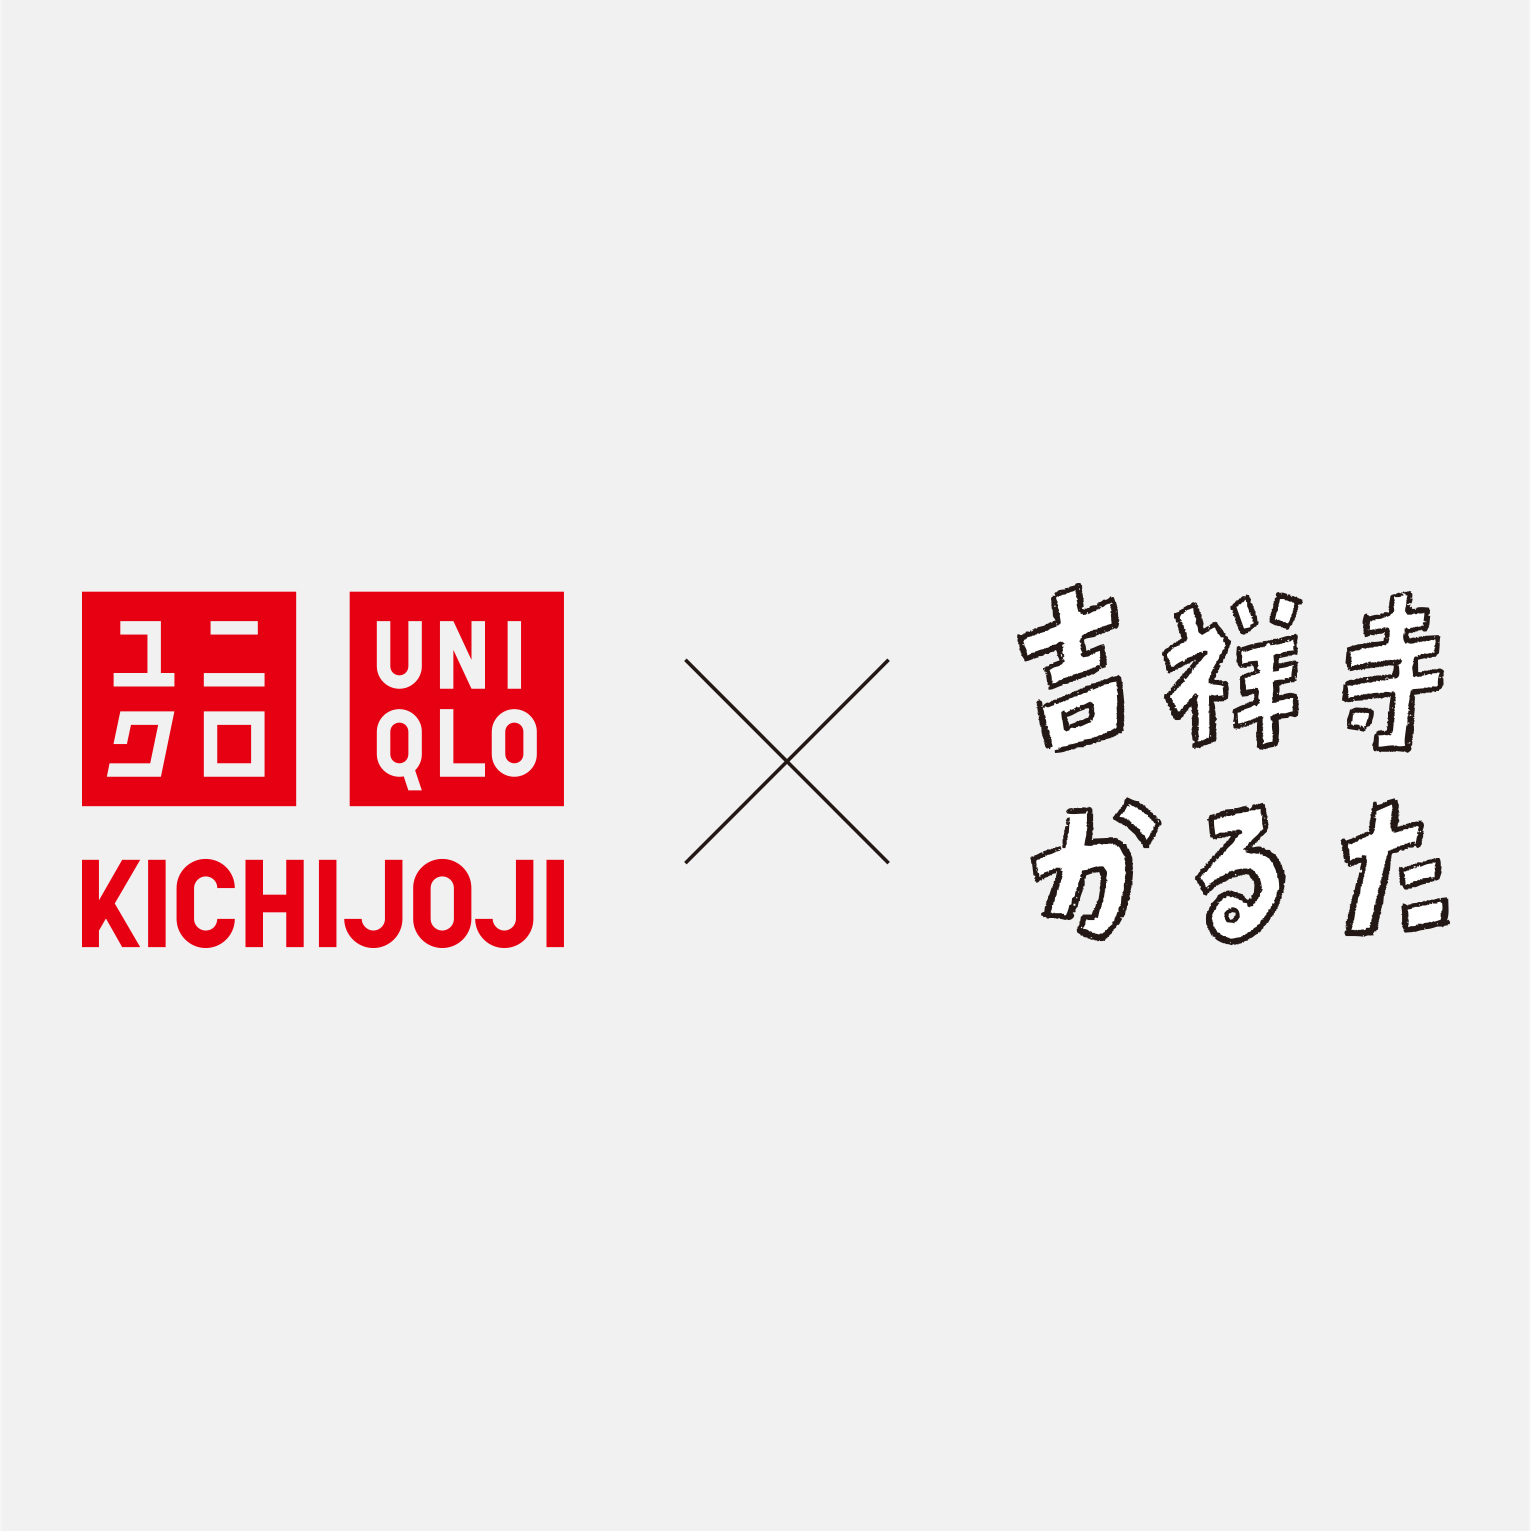 Uniqlo designs themes templates and downloadable graphic elements on  Dribbble